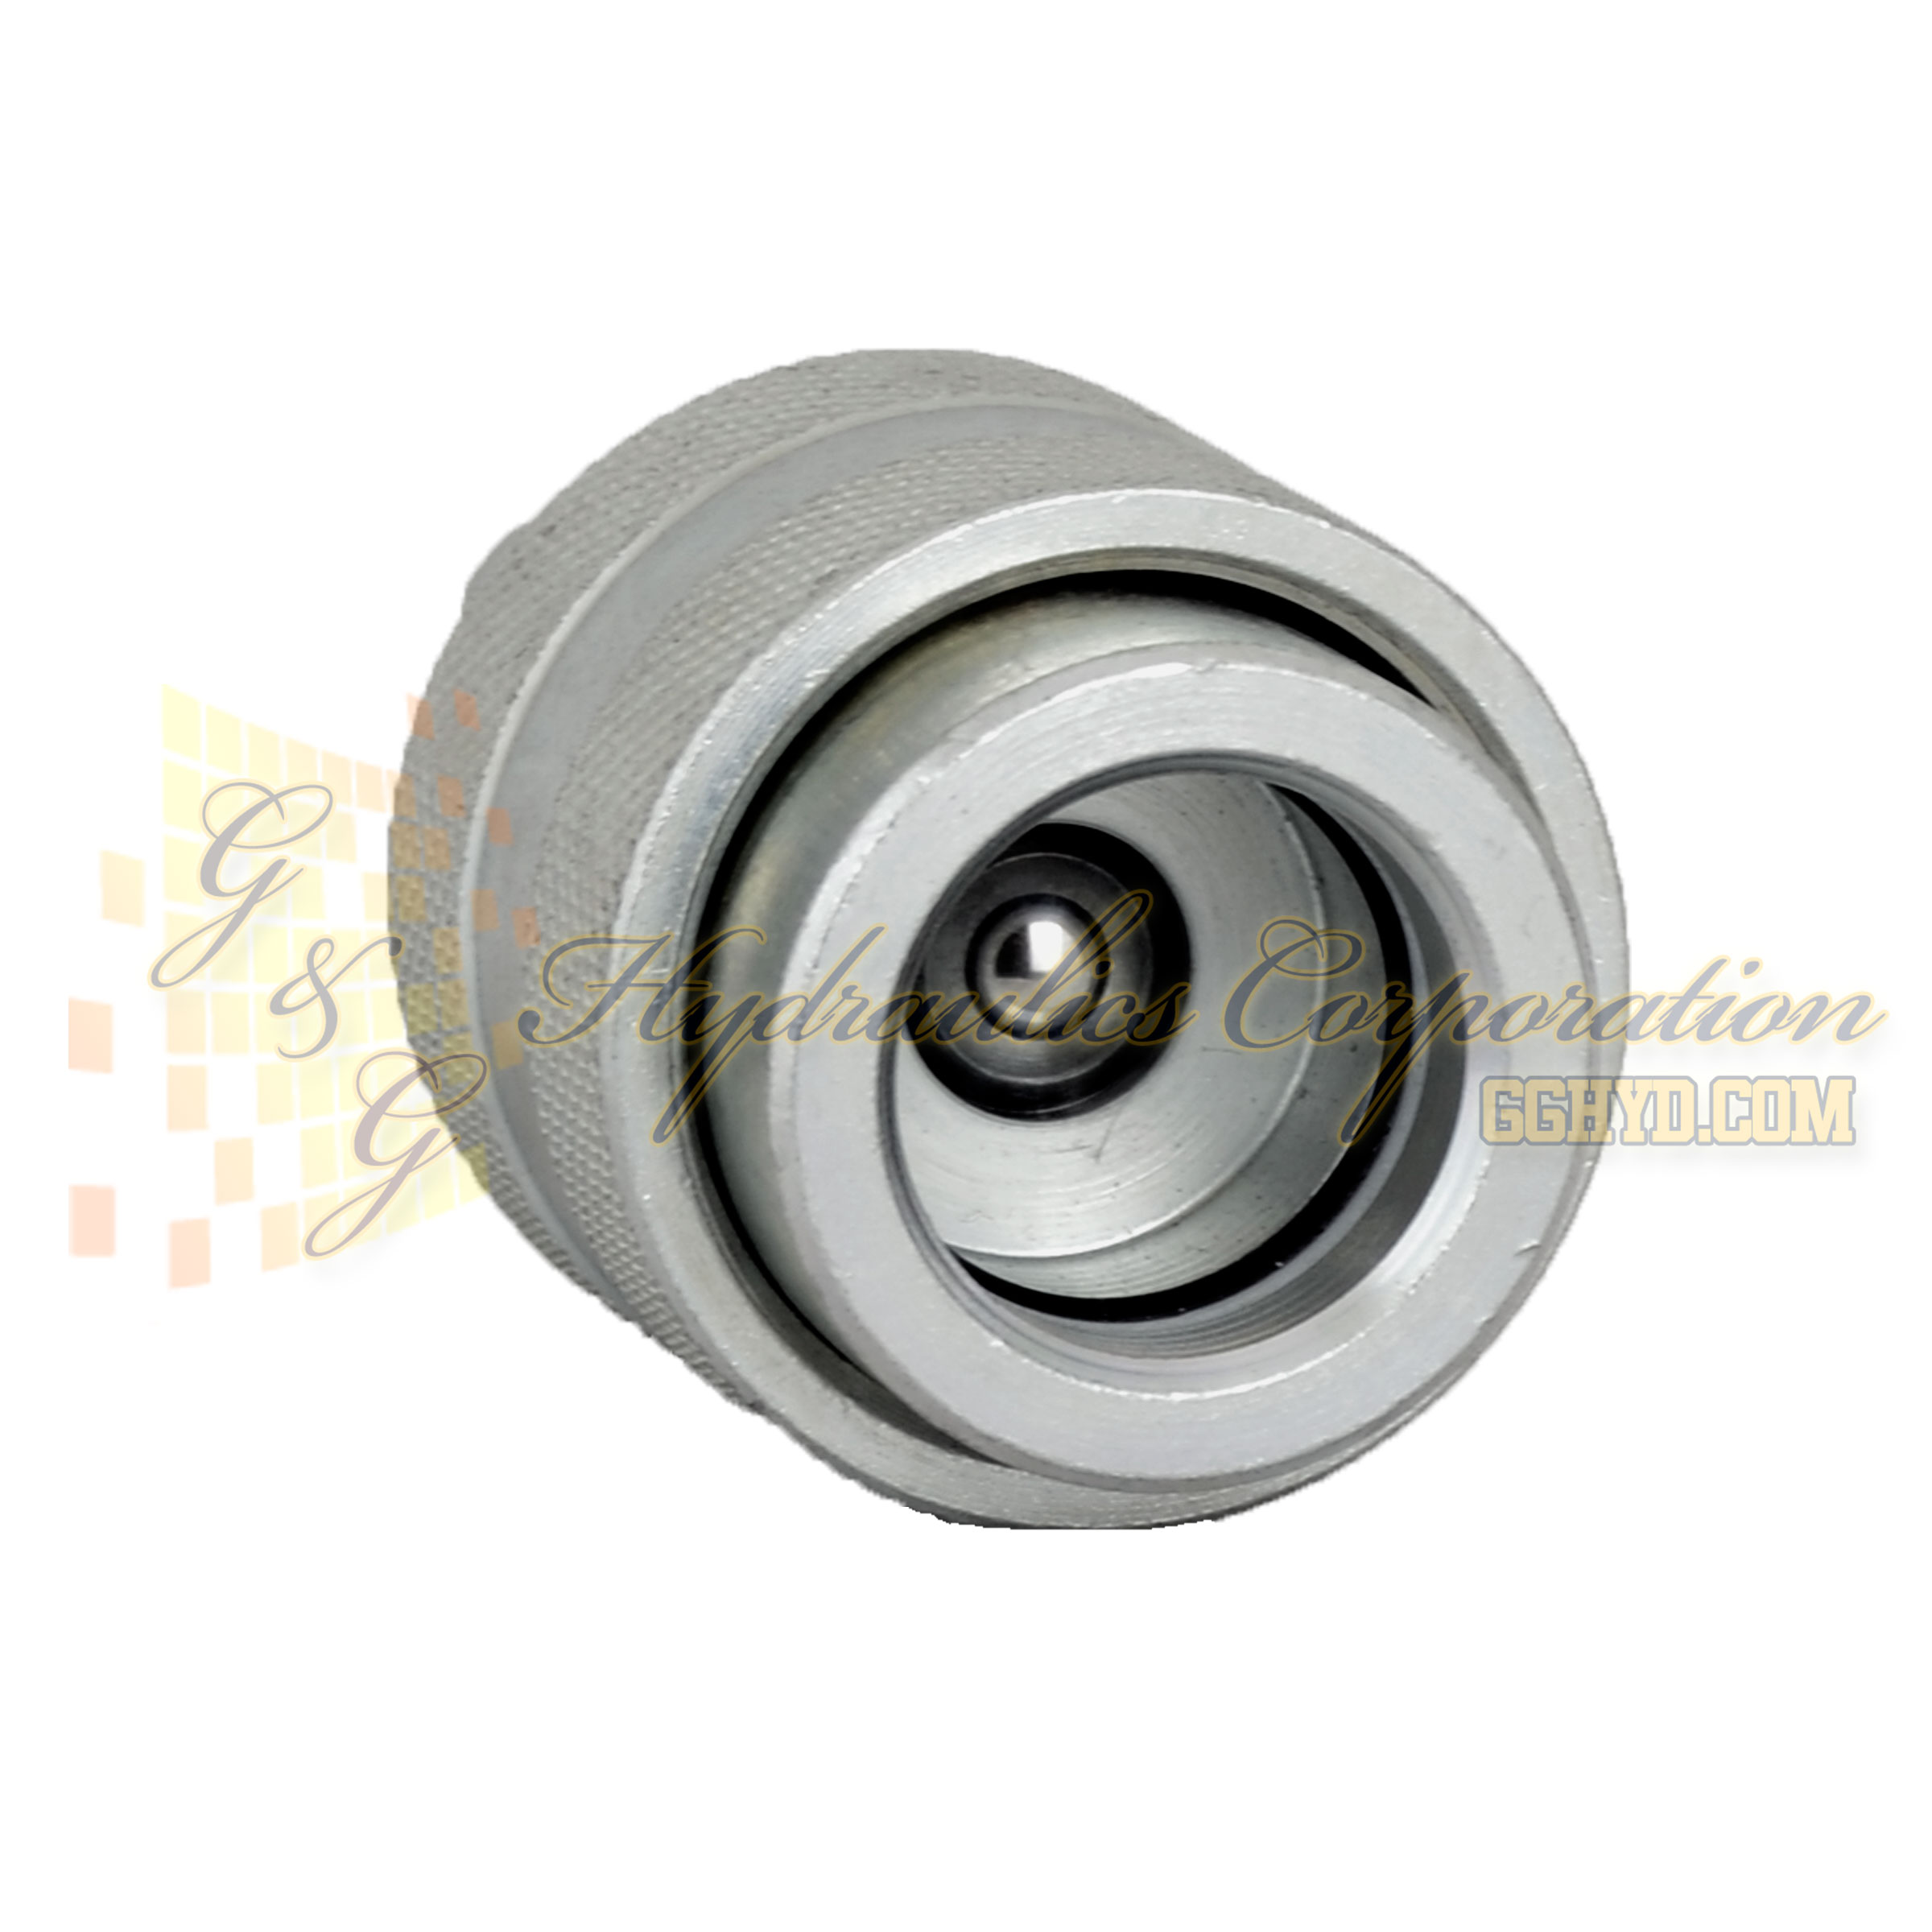 10-232-1484 CEJN Screw To Connect Coupling, 3/4" NPT Male Threads (10153 Psi - 700bar)